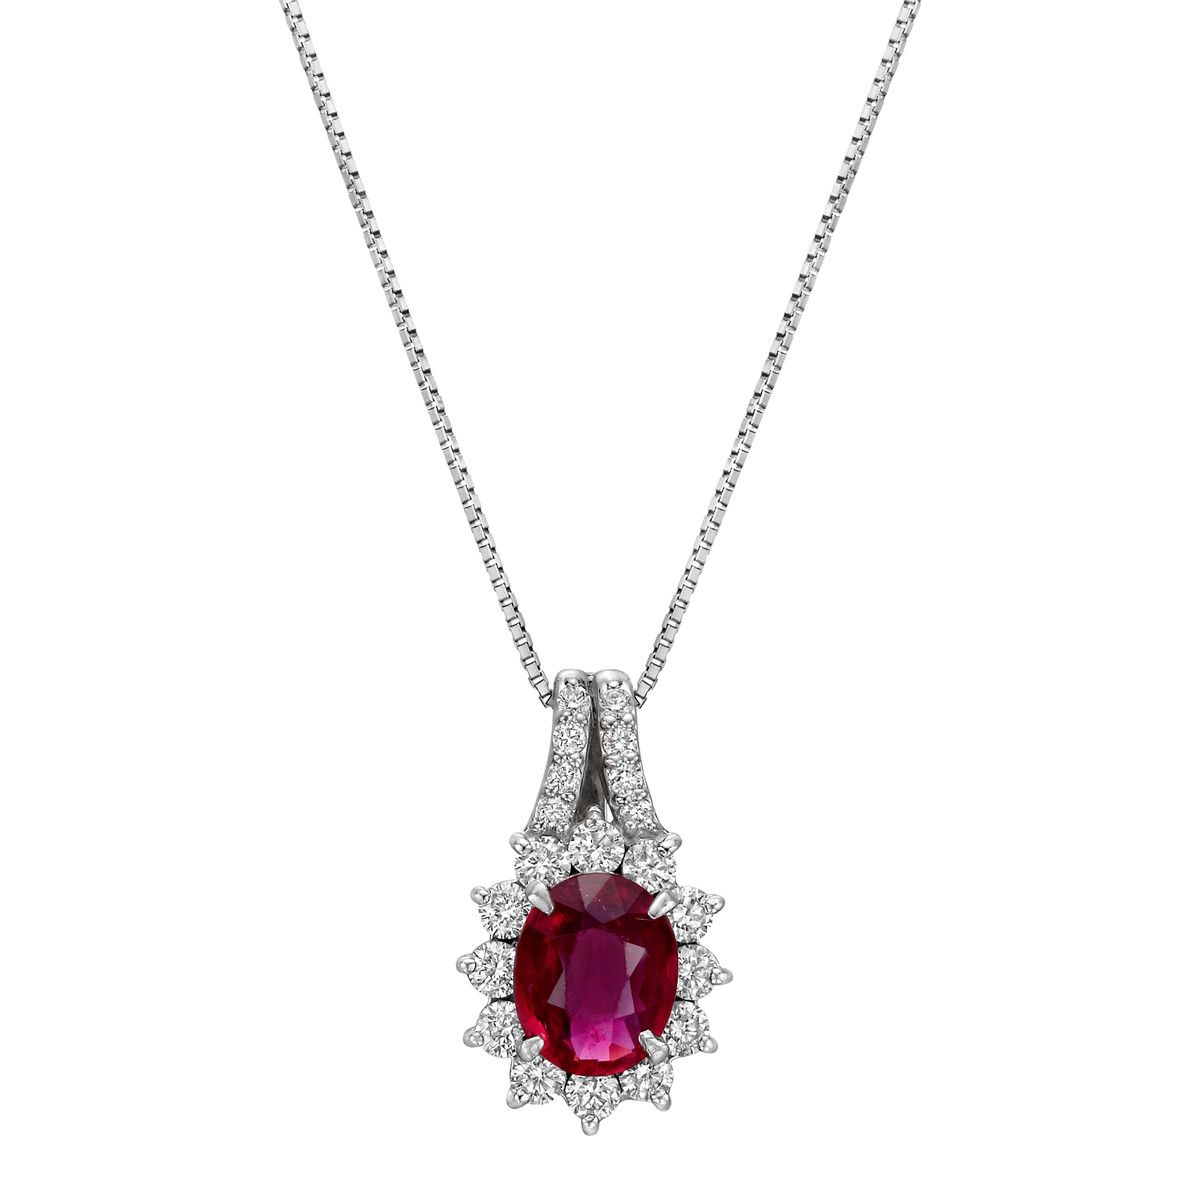 Oval Ruby Diamond Cluster Pendant | Betteridge Intended For 2019 Ruby And Diamond Cluster Necklaces (View 23 of 25)